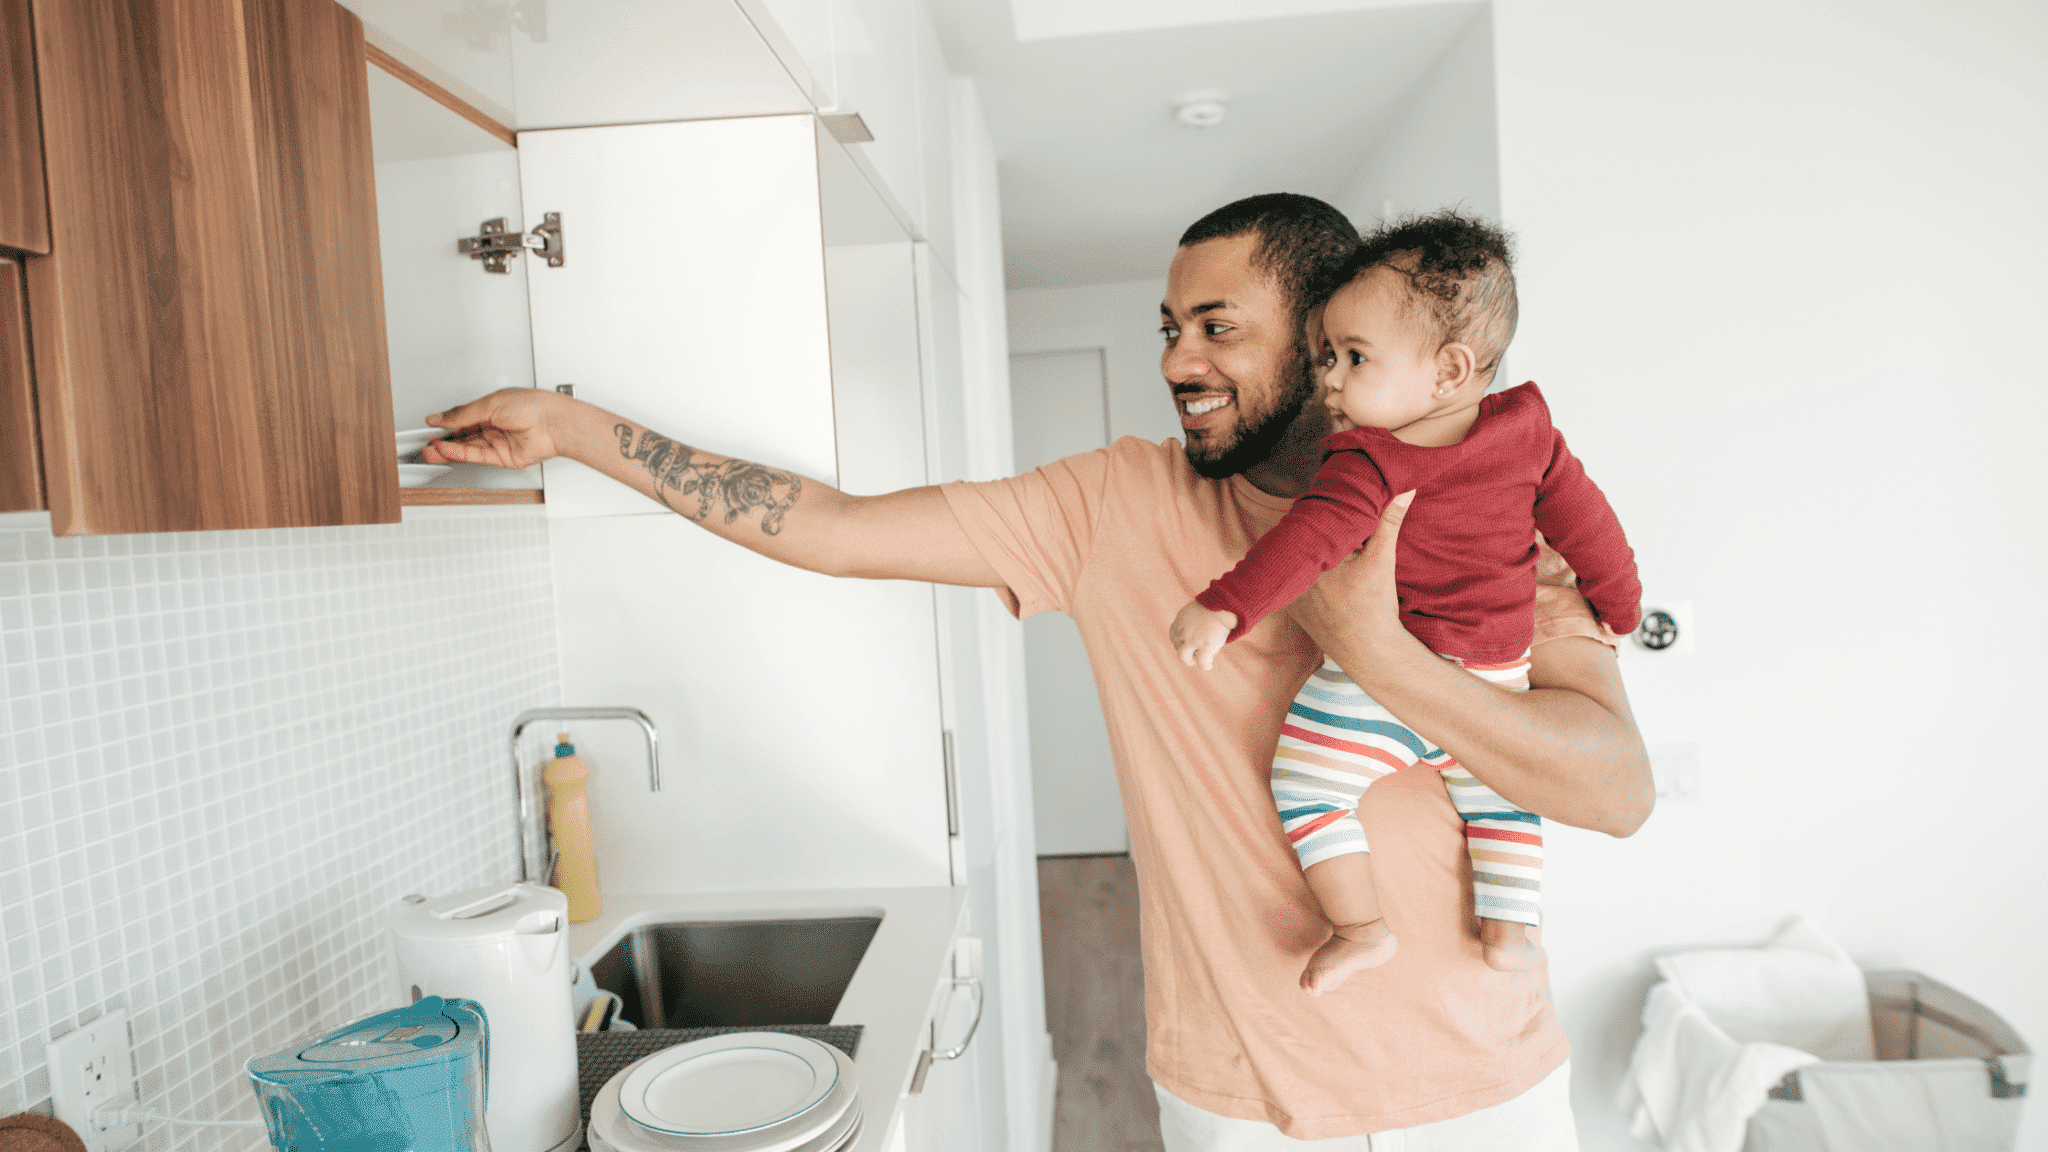 Airbnb Hosting A man holding a baby in an Airbnb.